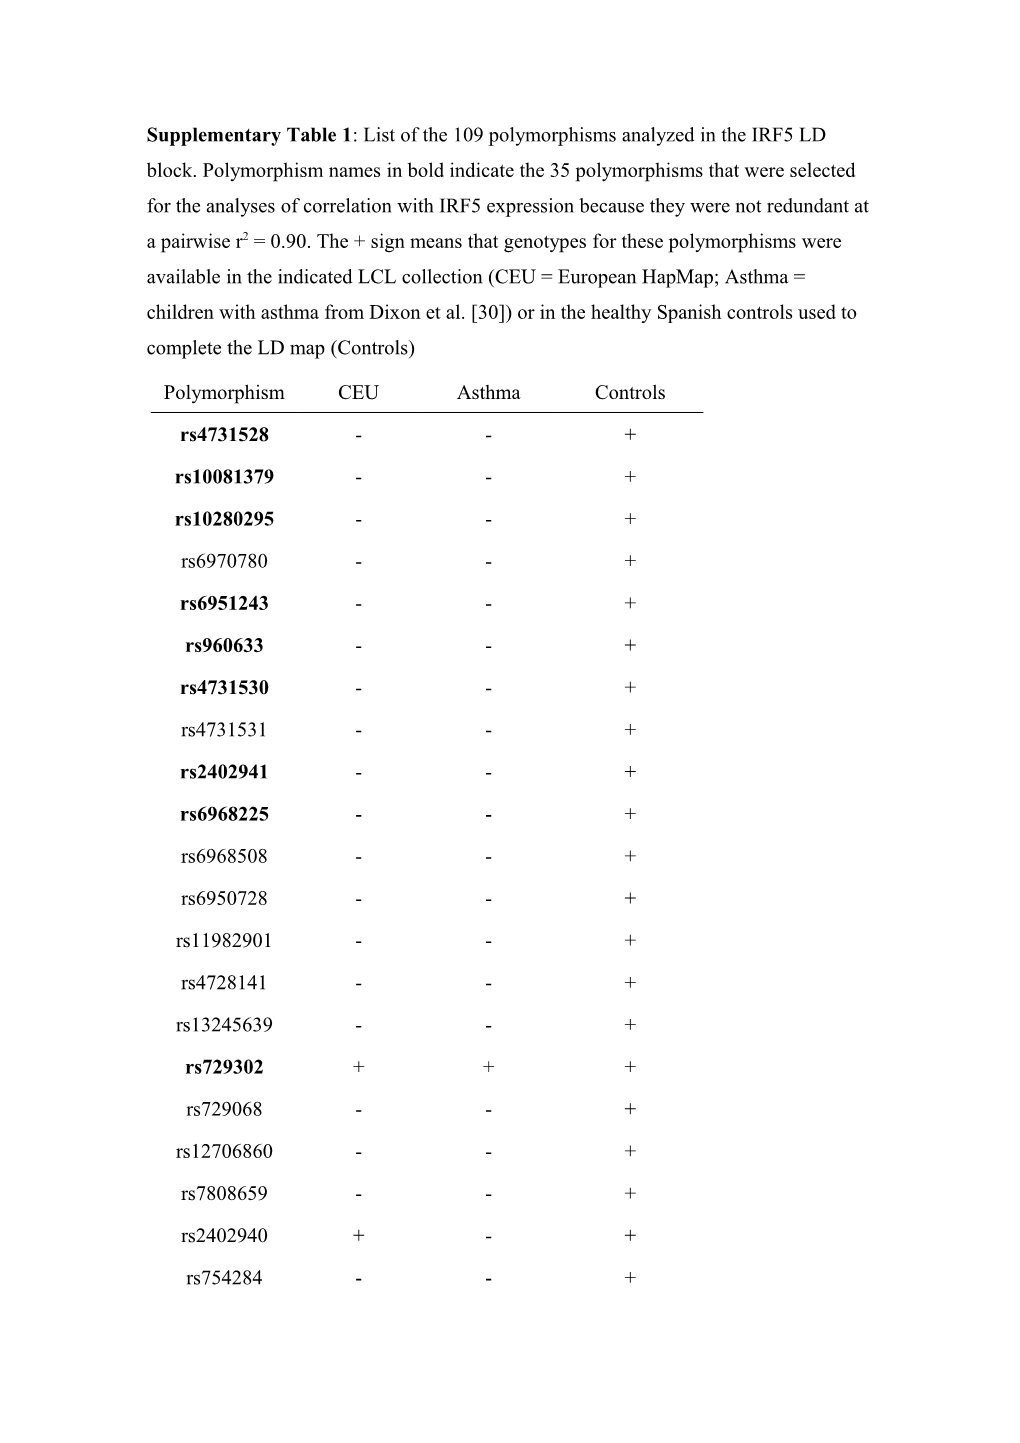 Supplementary Table 1: List of the 109 Polymorphisms Analyzed in the IRF5 LD Block